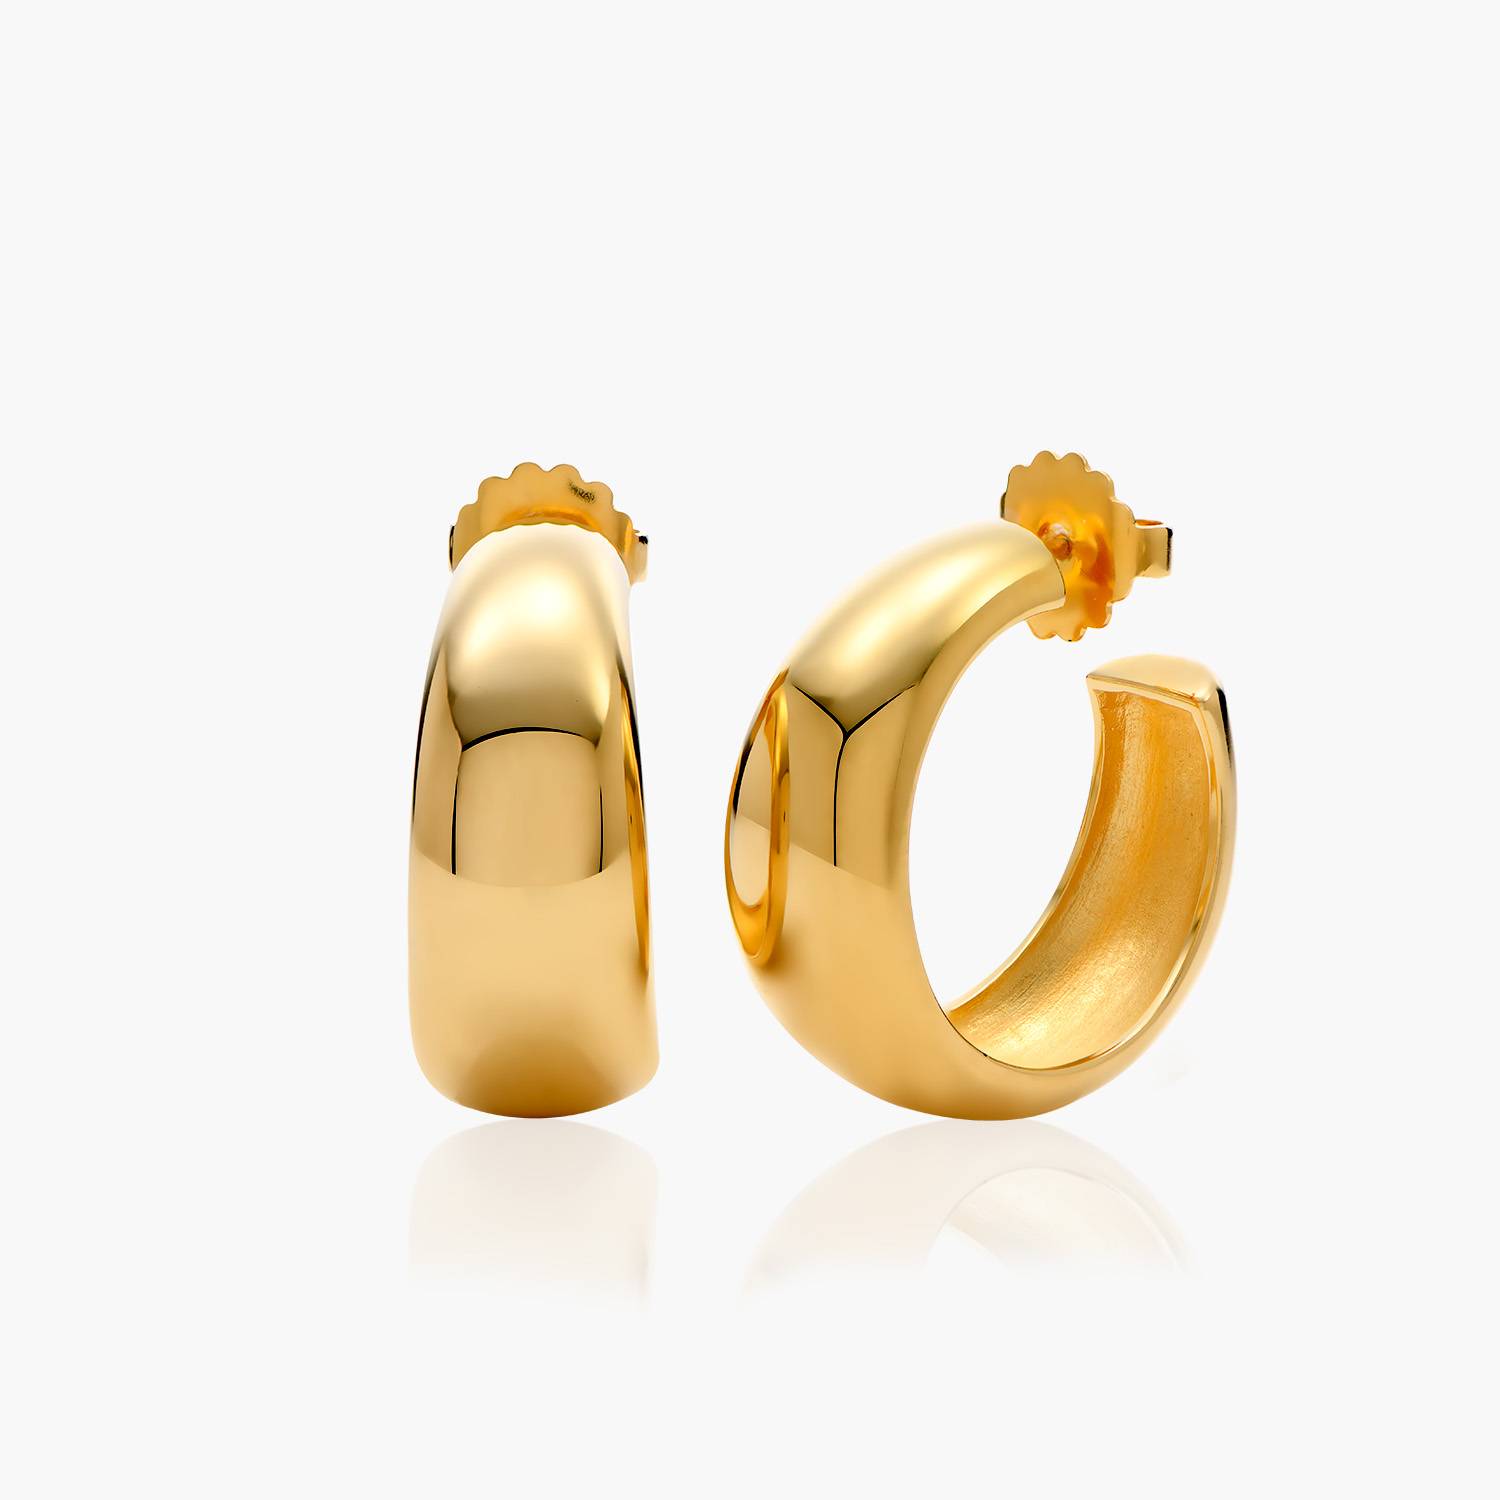 Buy Yellow Gold Earrings for Women by Whp Jewellers Online | Ajio.com-sgquangbinhtourist.com.vn